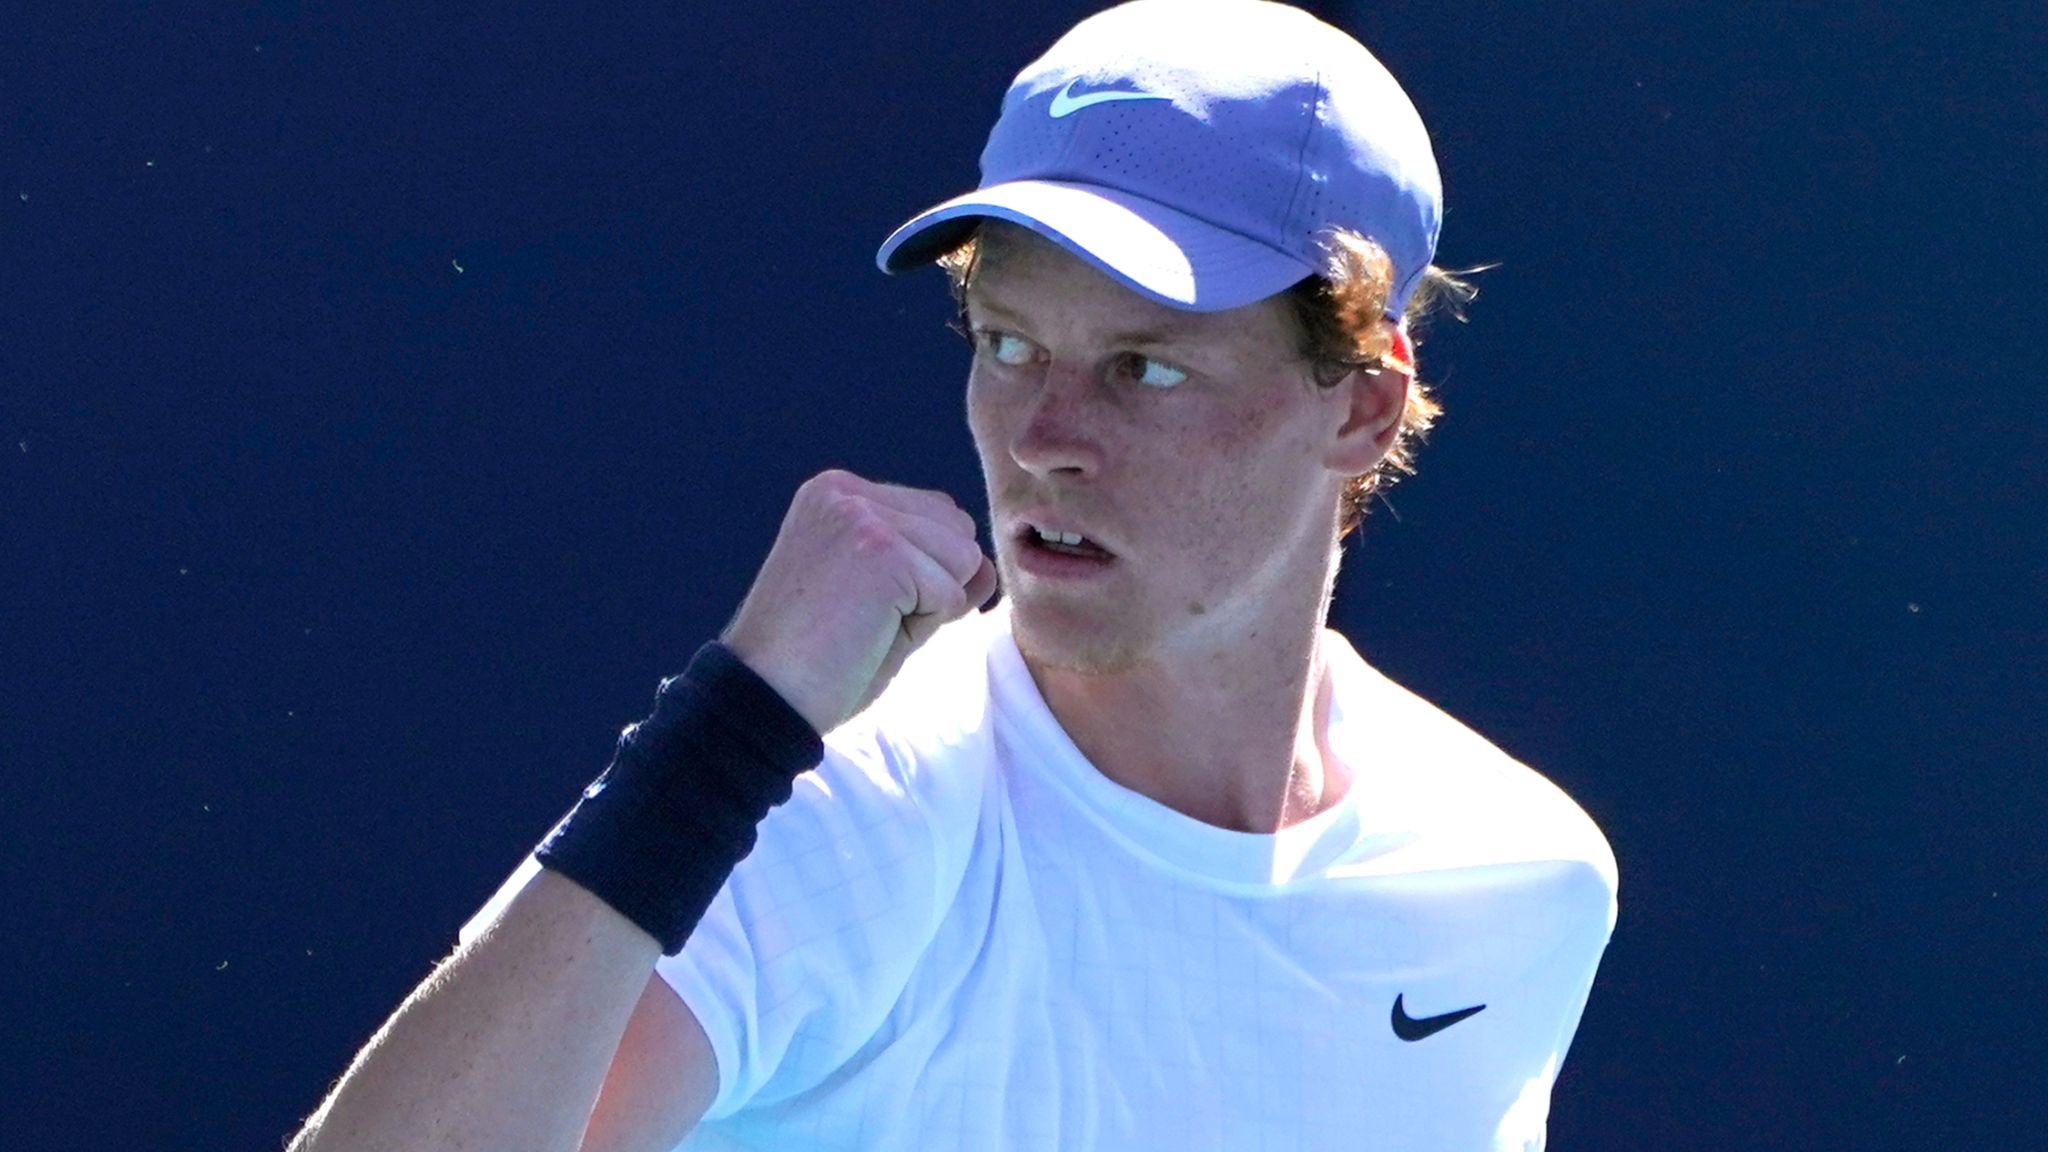 Controverse Missie Landgoed Miami Open: Jannik Sinner is fast becoming the next big thing in men's  tennis with a rapid rise up the rankings | Tennis News | Sky Sports